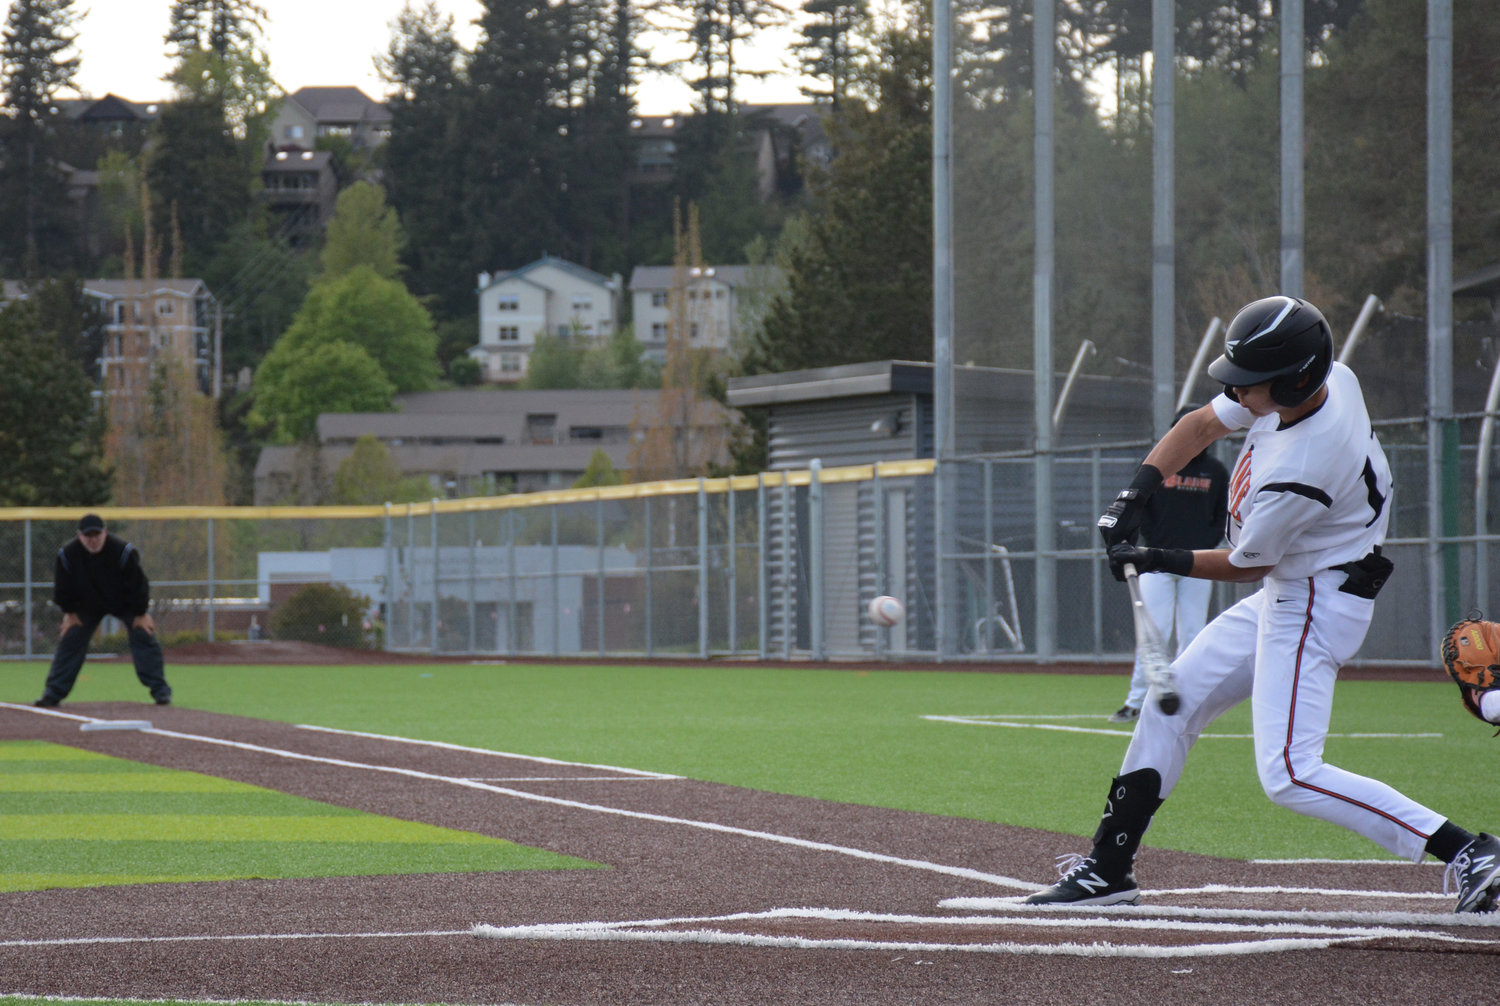 Hunter Vezzetti at bat for the Borderites in their 13-3 win over Lynden Christian in the district 1/2 1A tournament May 7 at Sehome High School. Vezzetti had two RBI doubles.